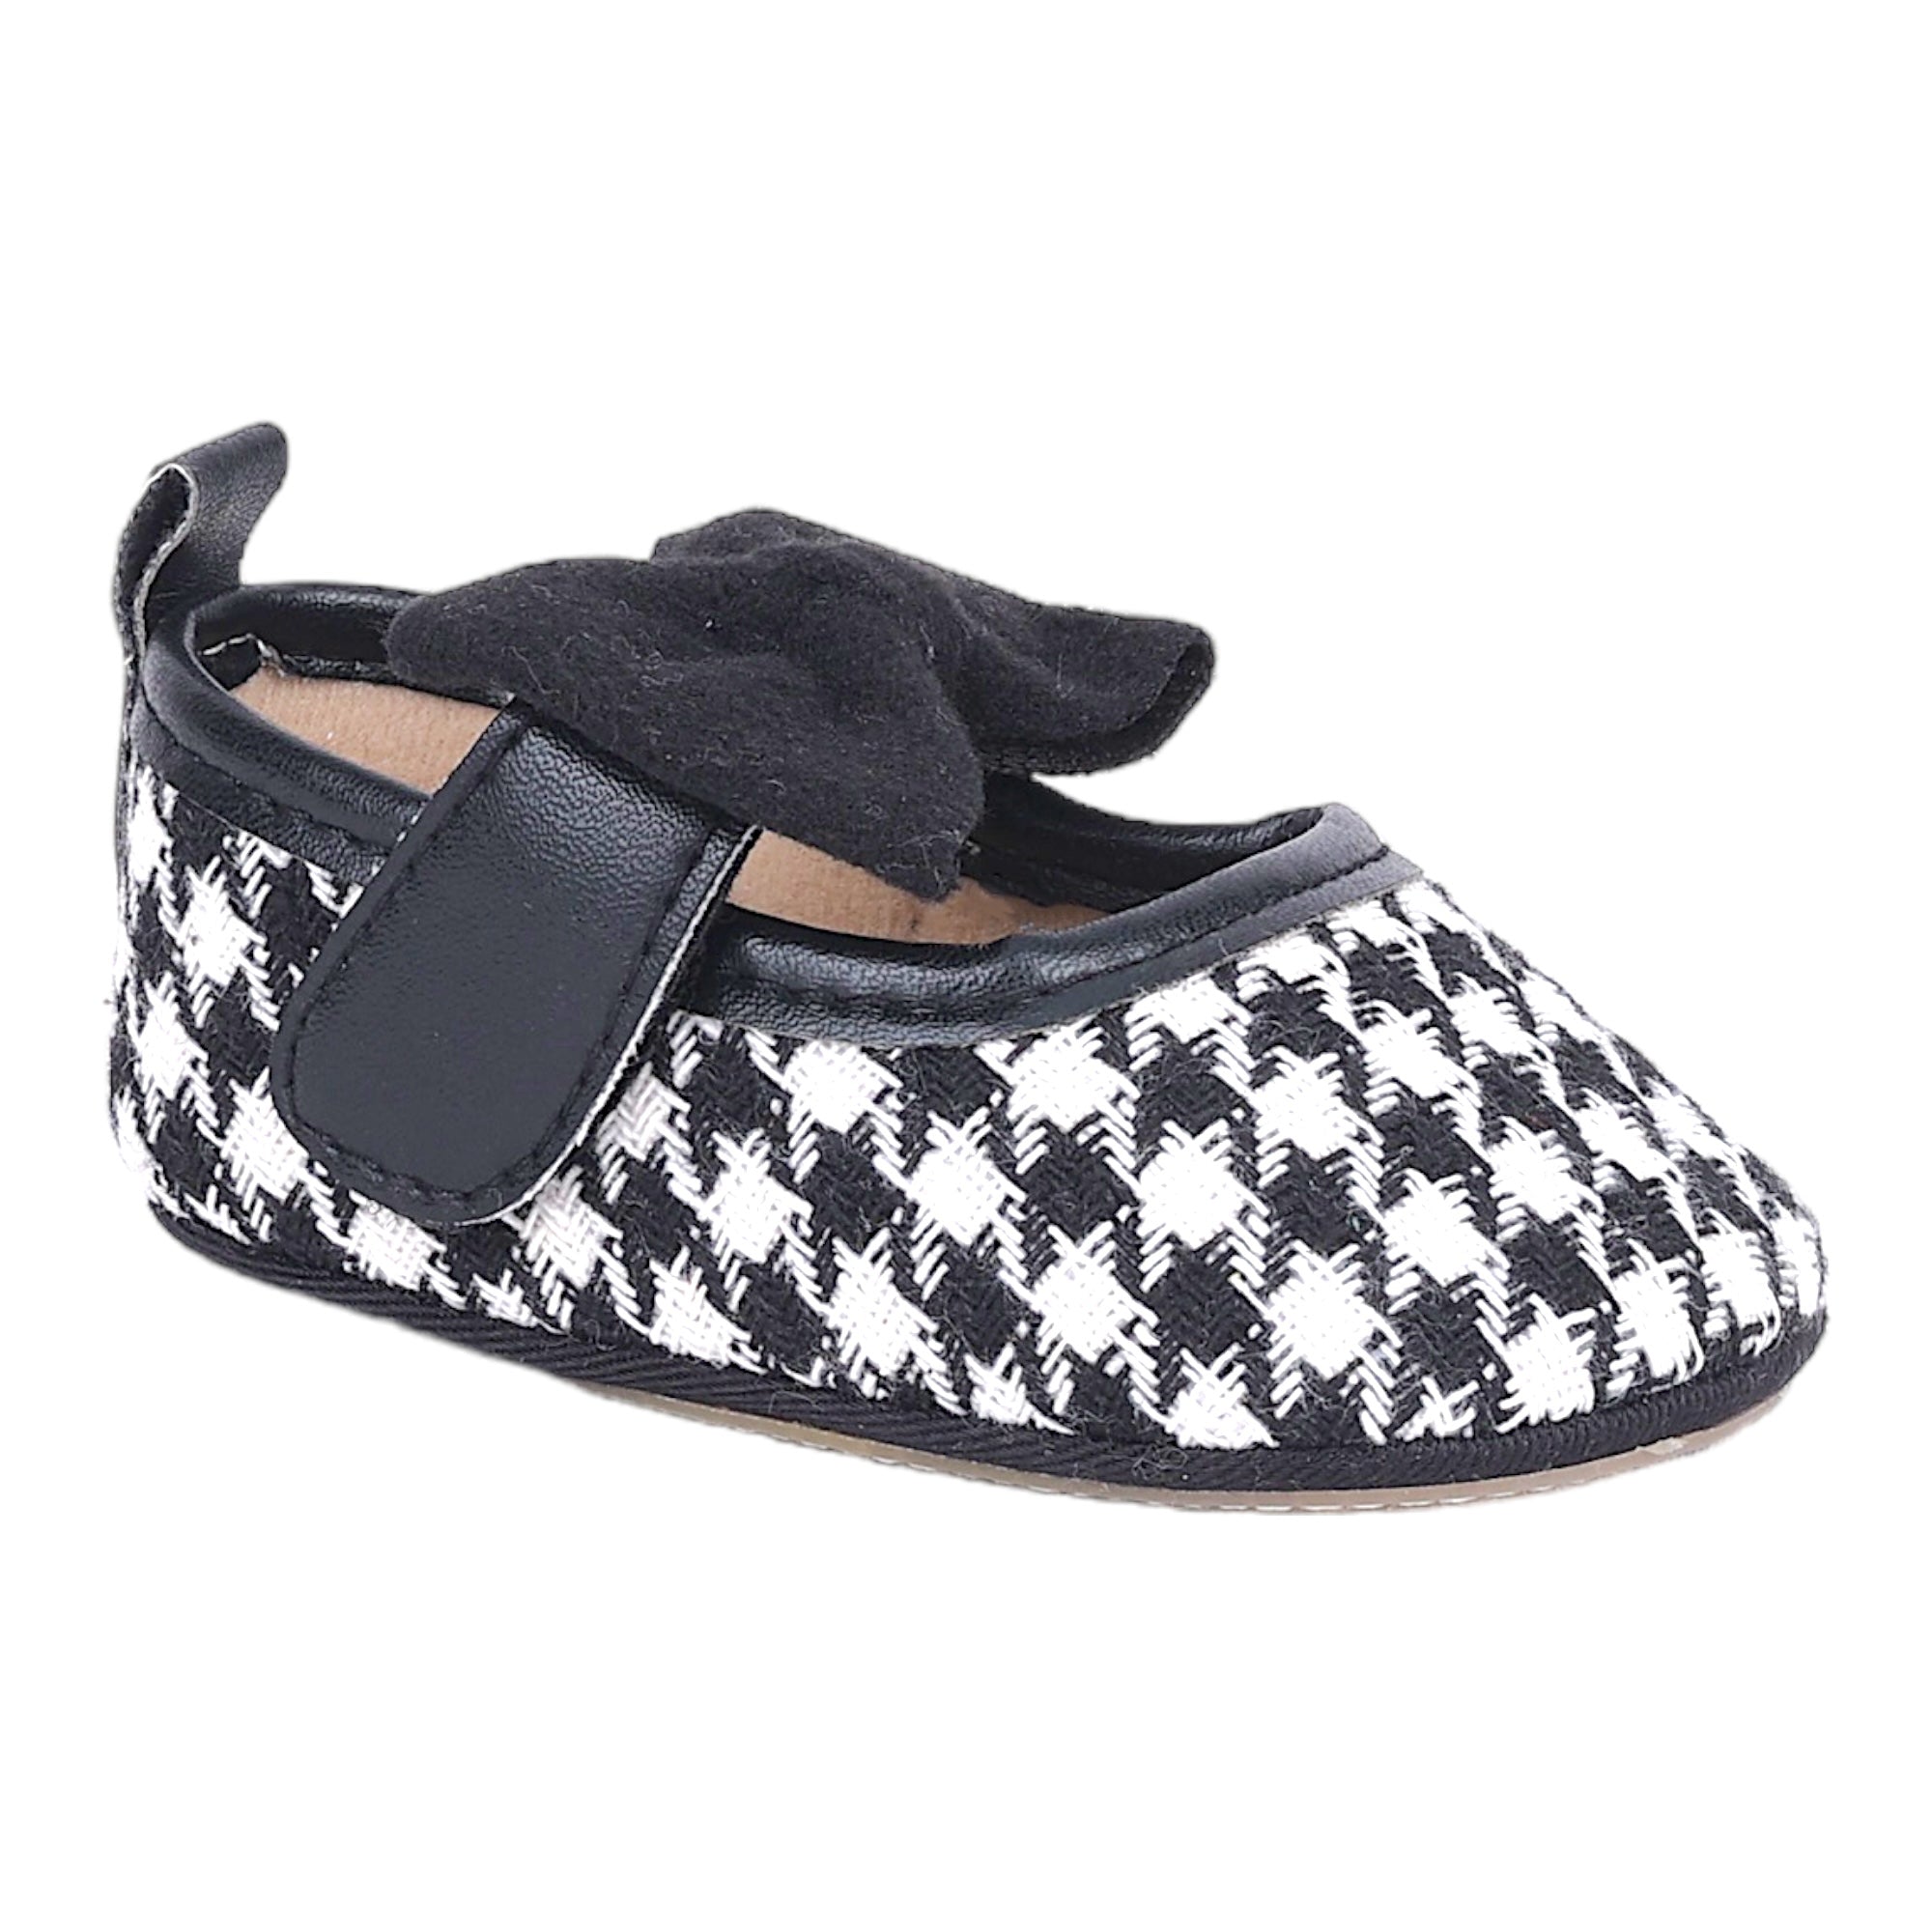 Baby Moo Houndstooth Print with Bow Velcro Strap Ballerina Booties - Black